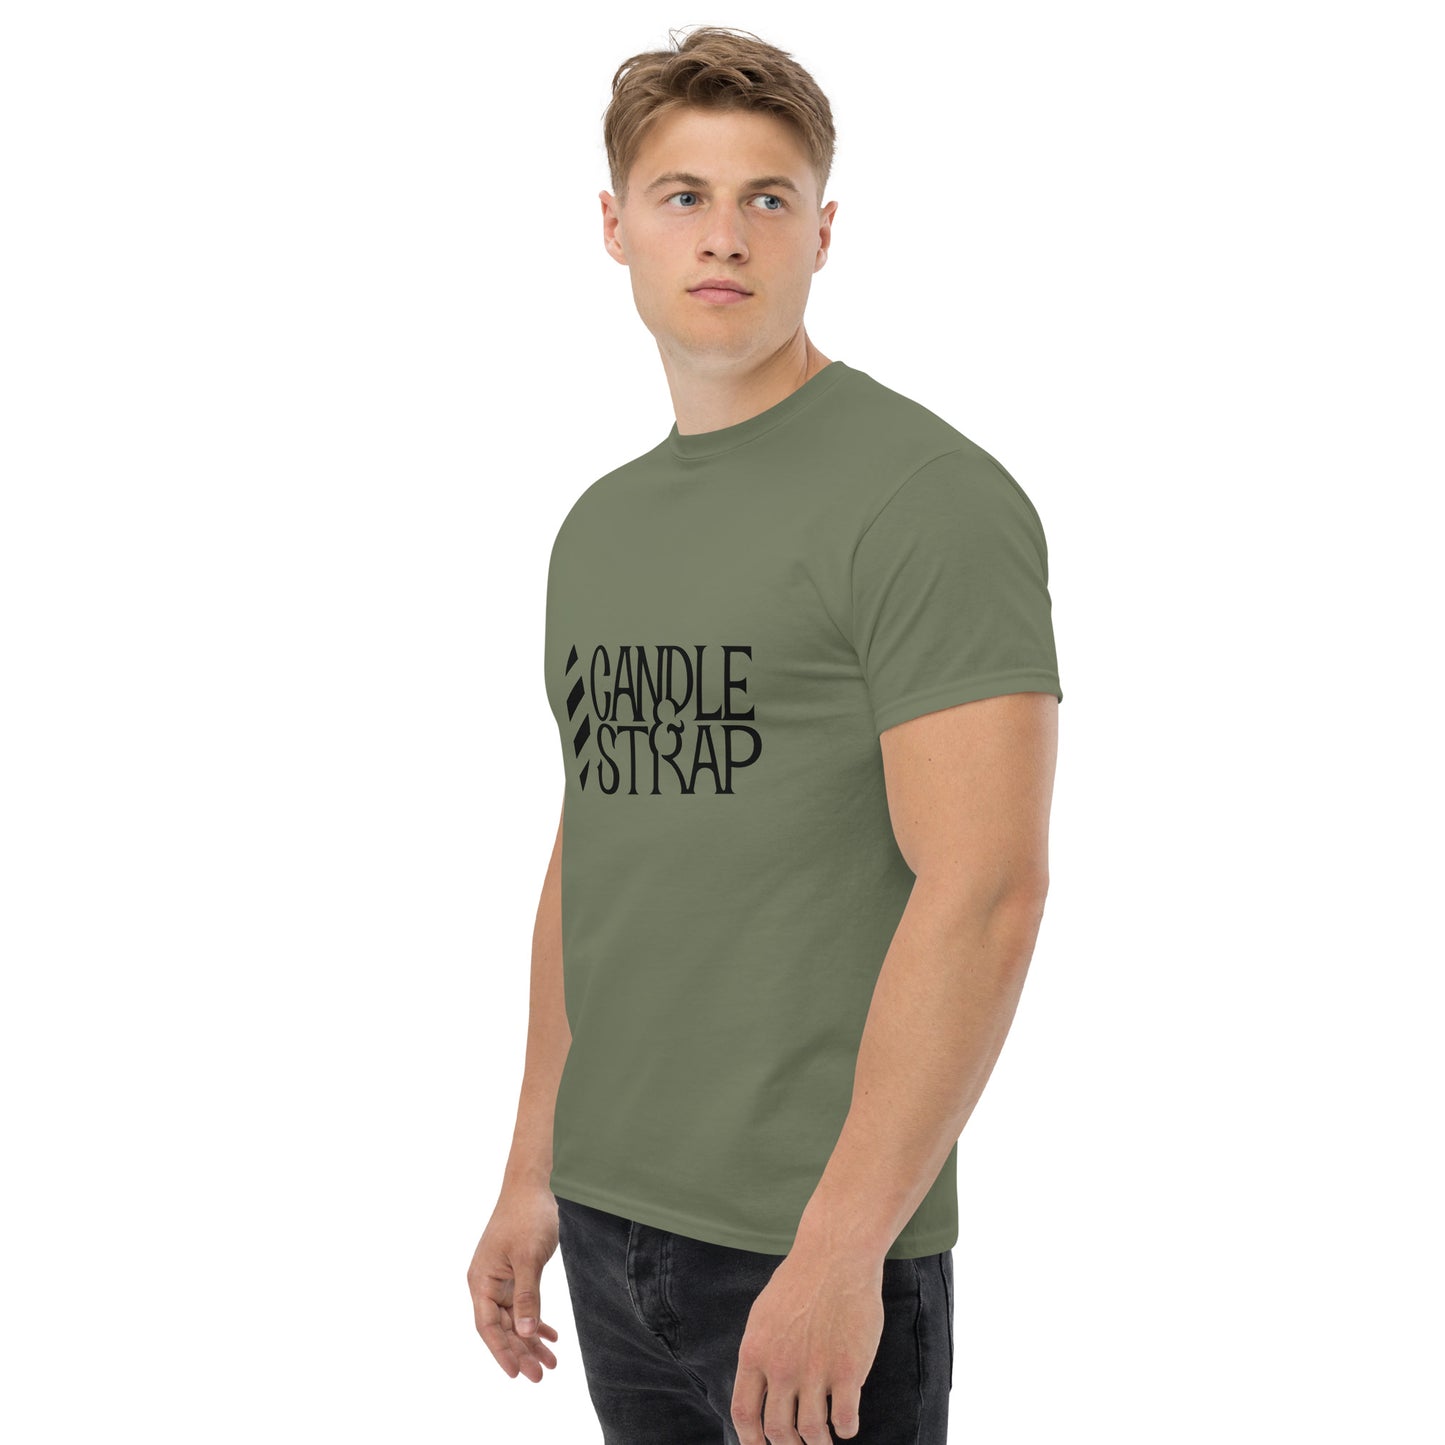 Candle & Strap - Men's classic tee